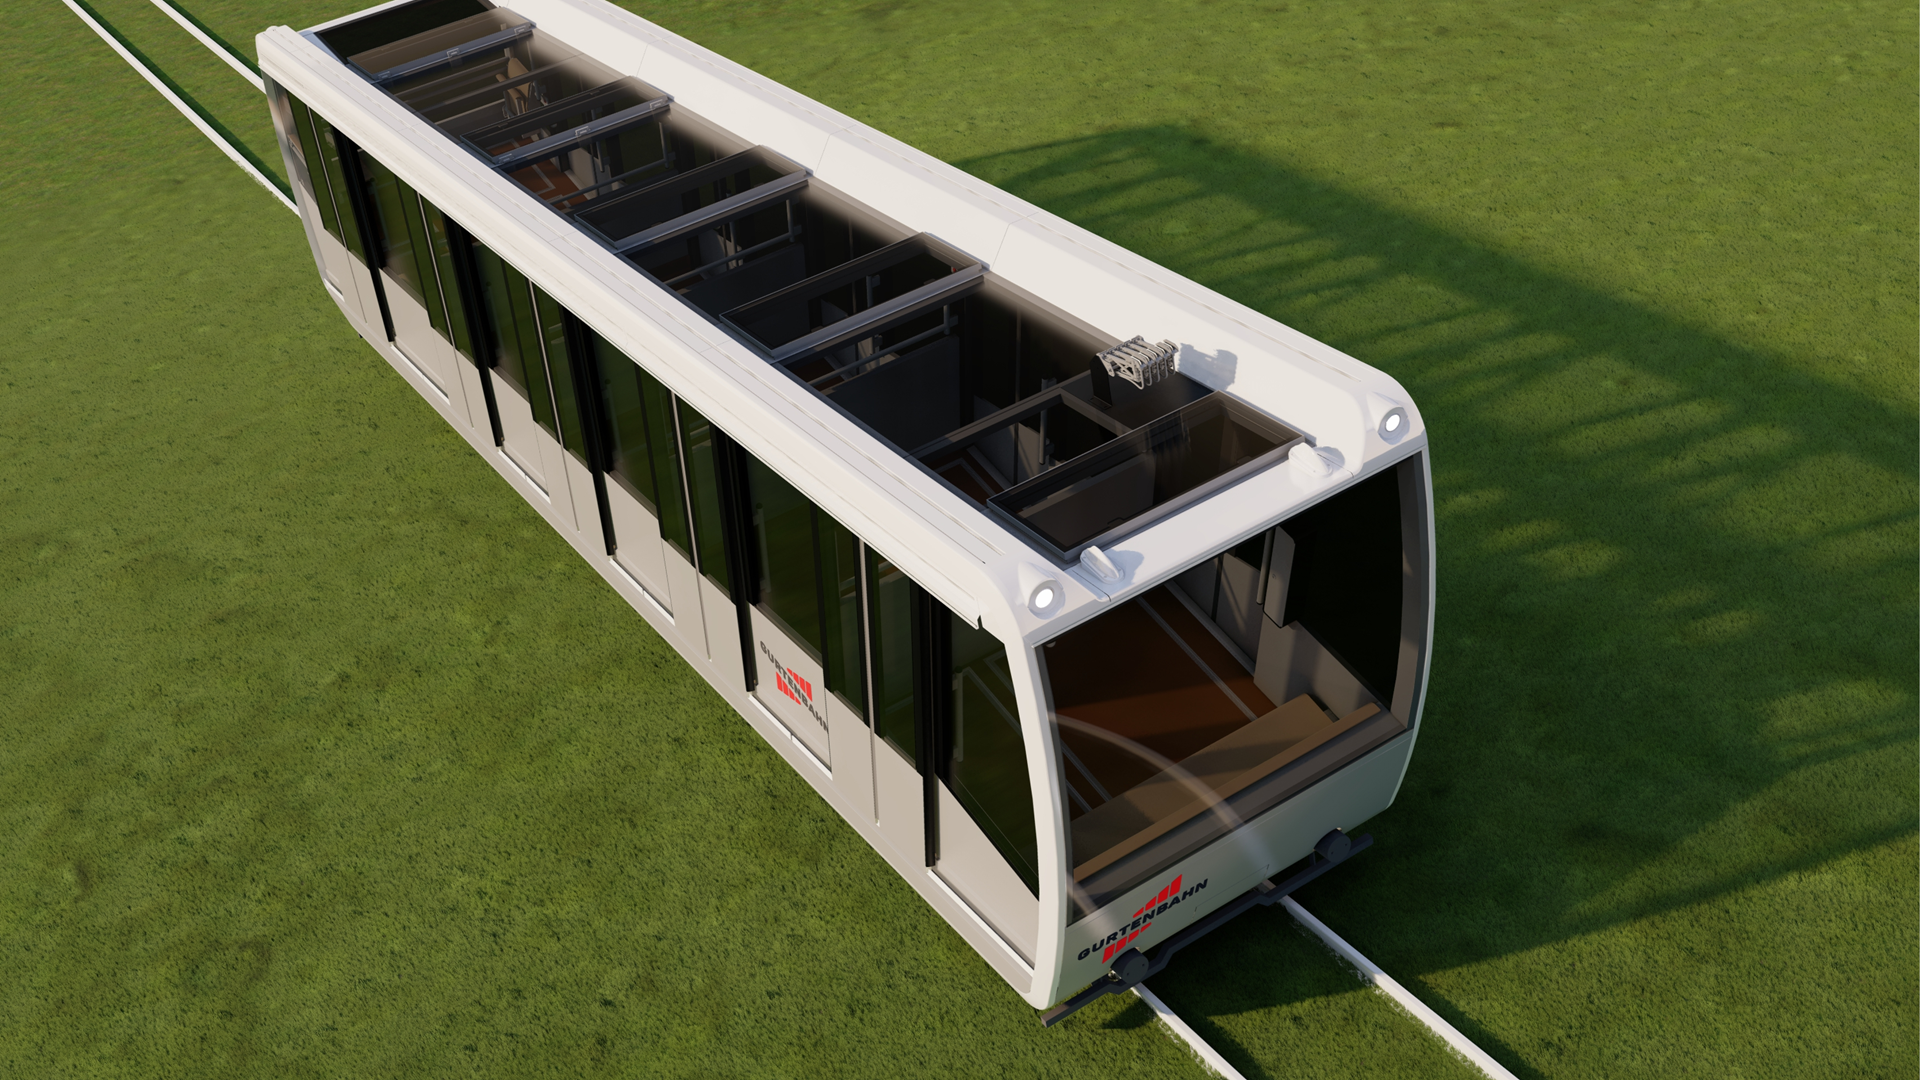 The new design of the Gurtenbahn from 2024, bird's eye view picture